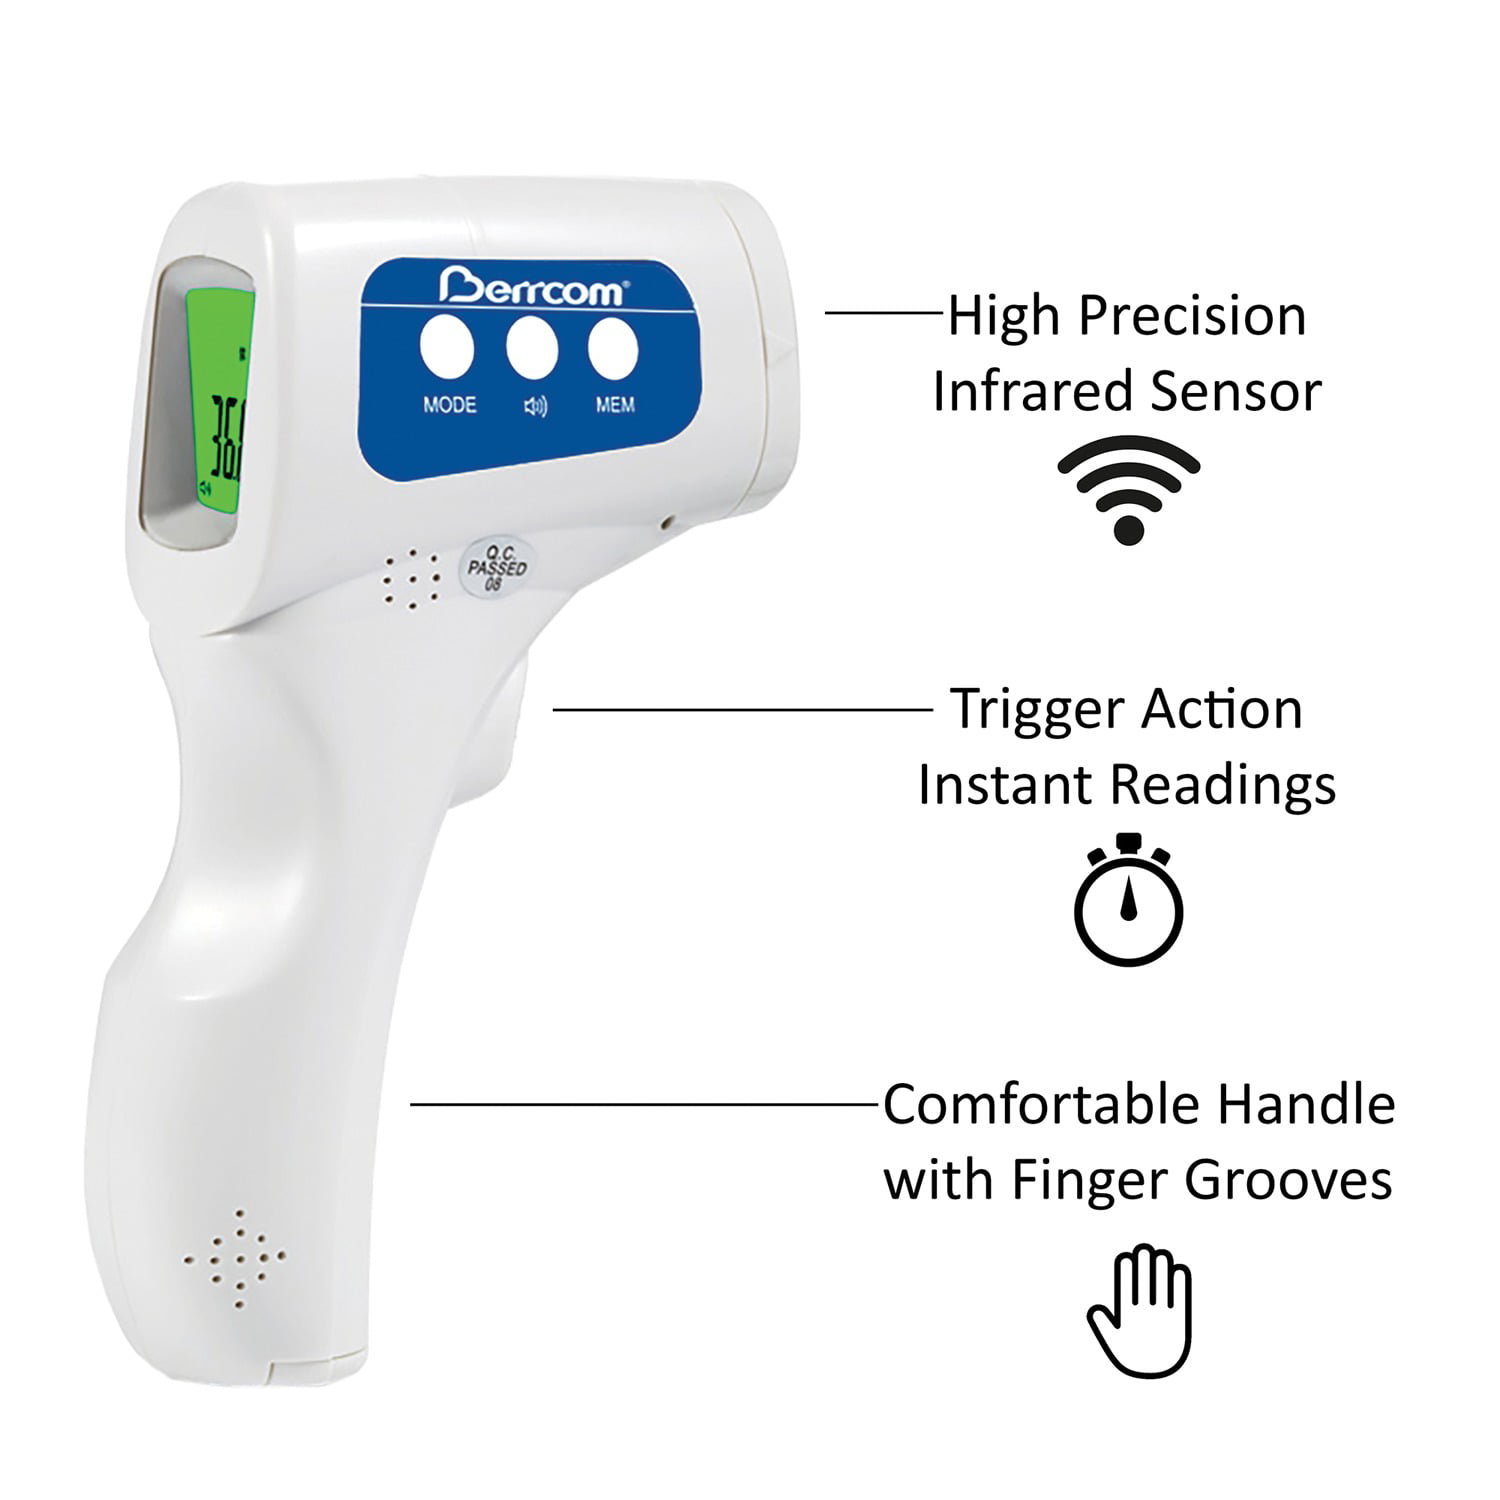 Berrcom Infrared Forehead Thermometer is on sale at